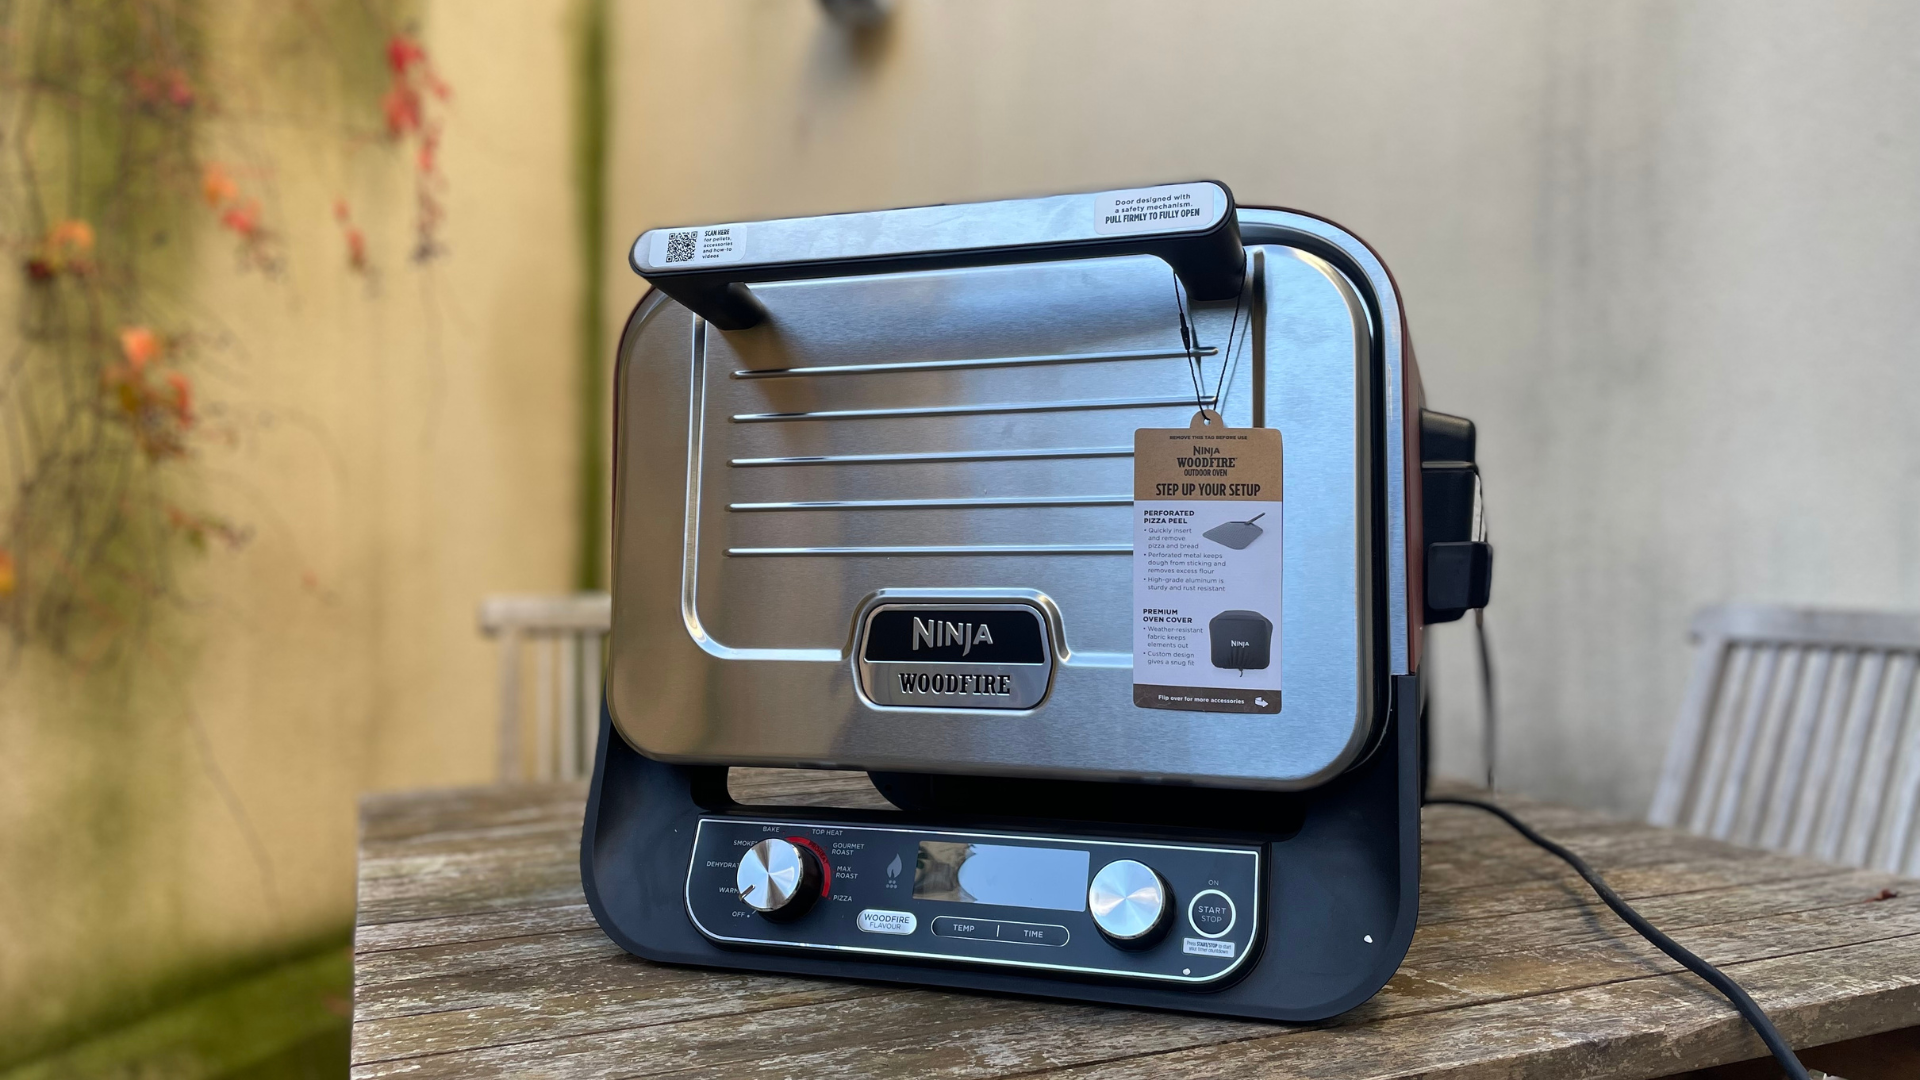 Ninja Woodfire Electric Outdoor Oven review: the do-it-all